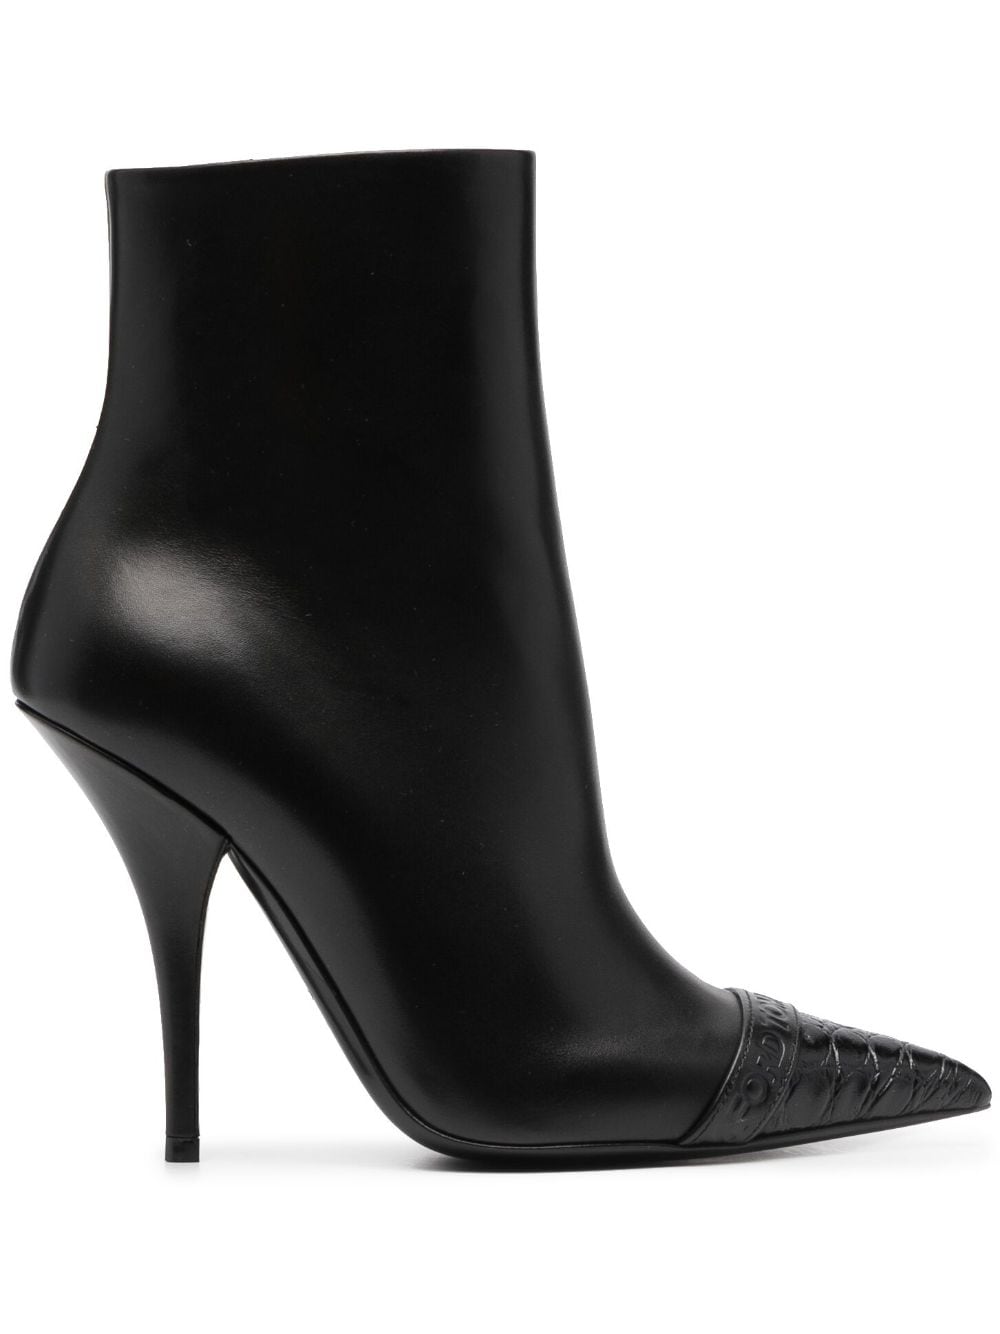 Image 1 of TOM FORD pointed toe leather ankle boots